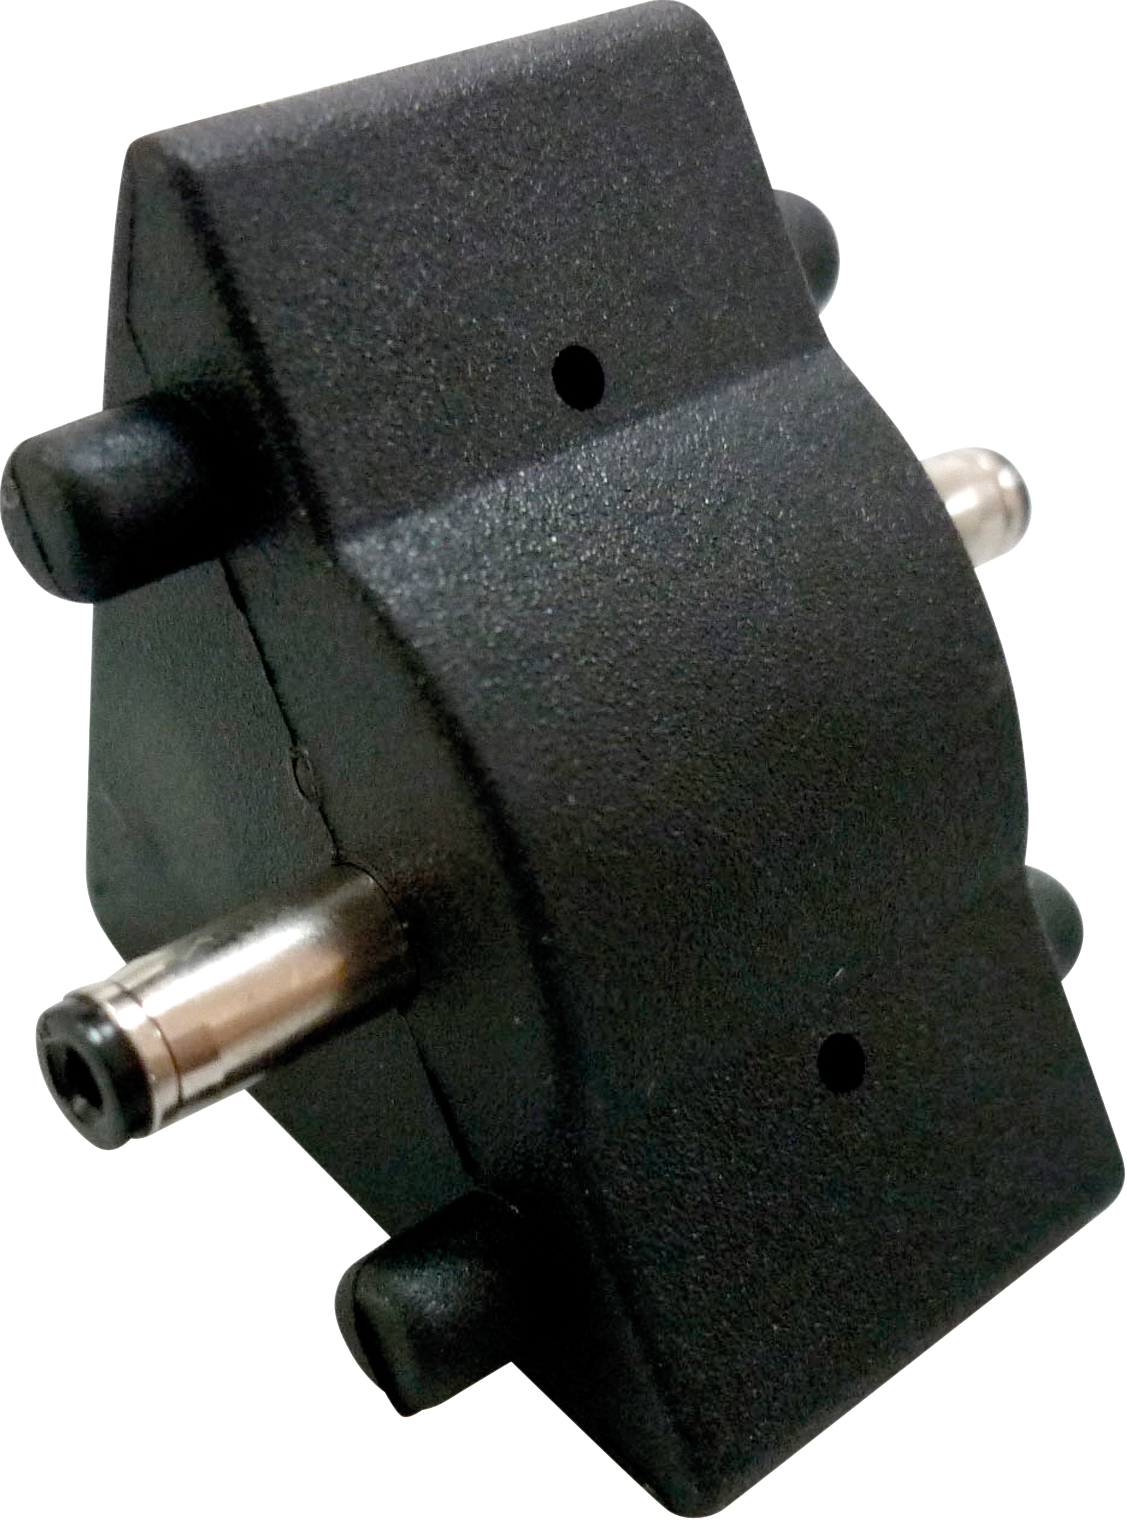 PVC Triangular Connector To Connect Additional Strip - LEDTCON 